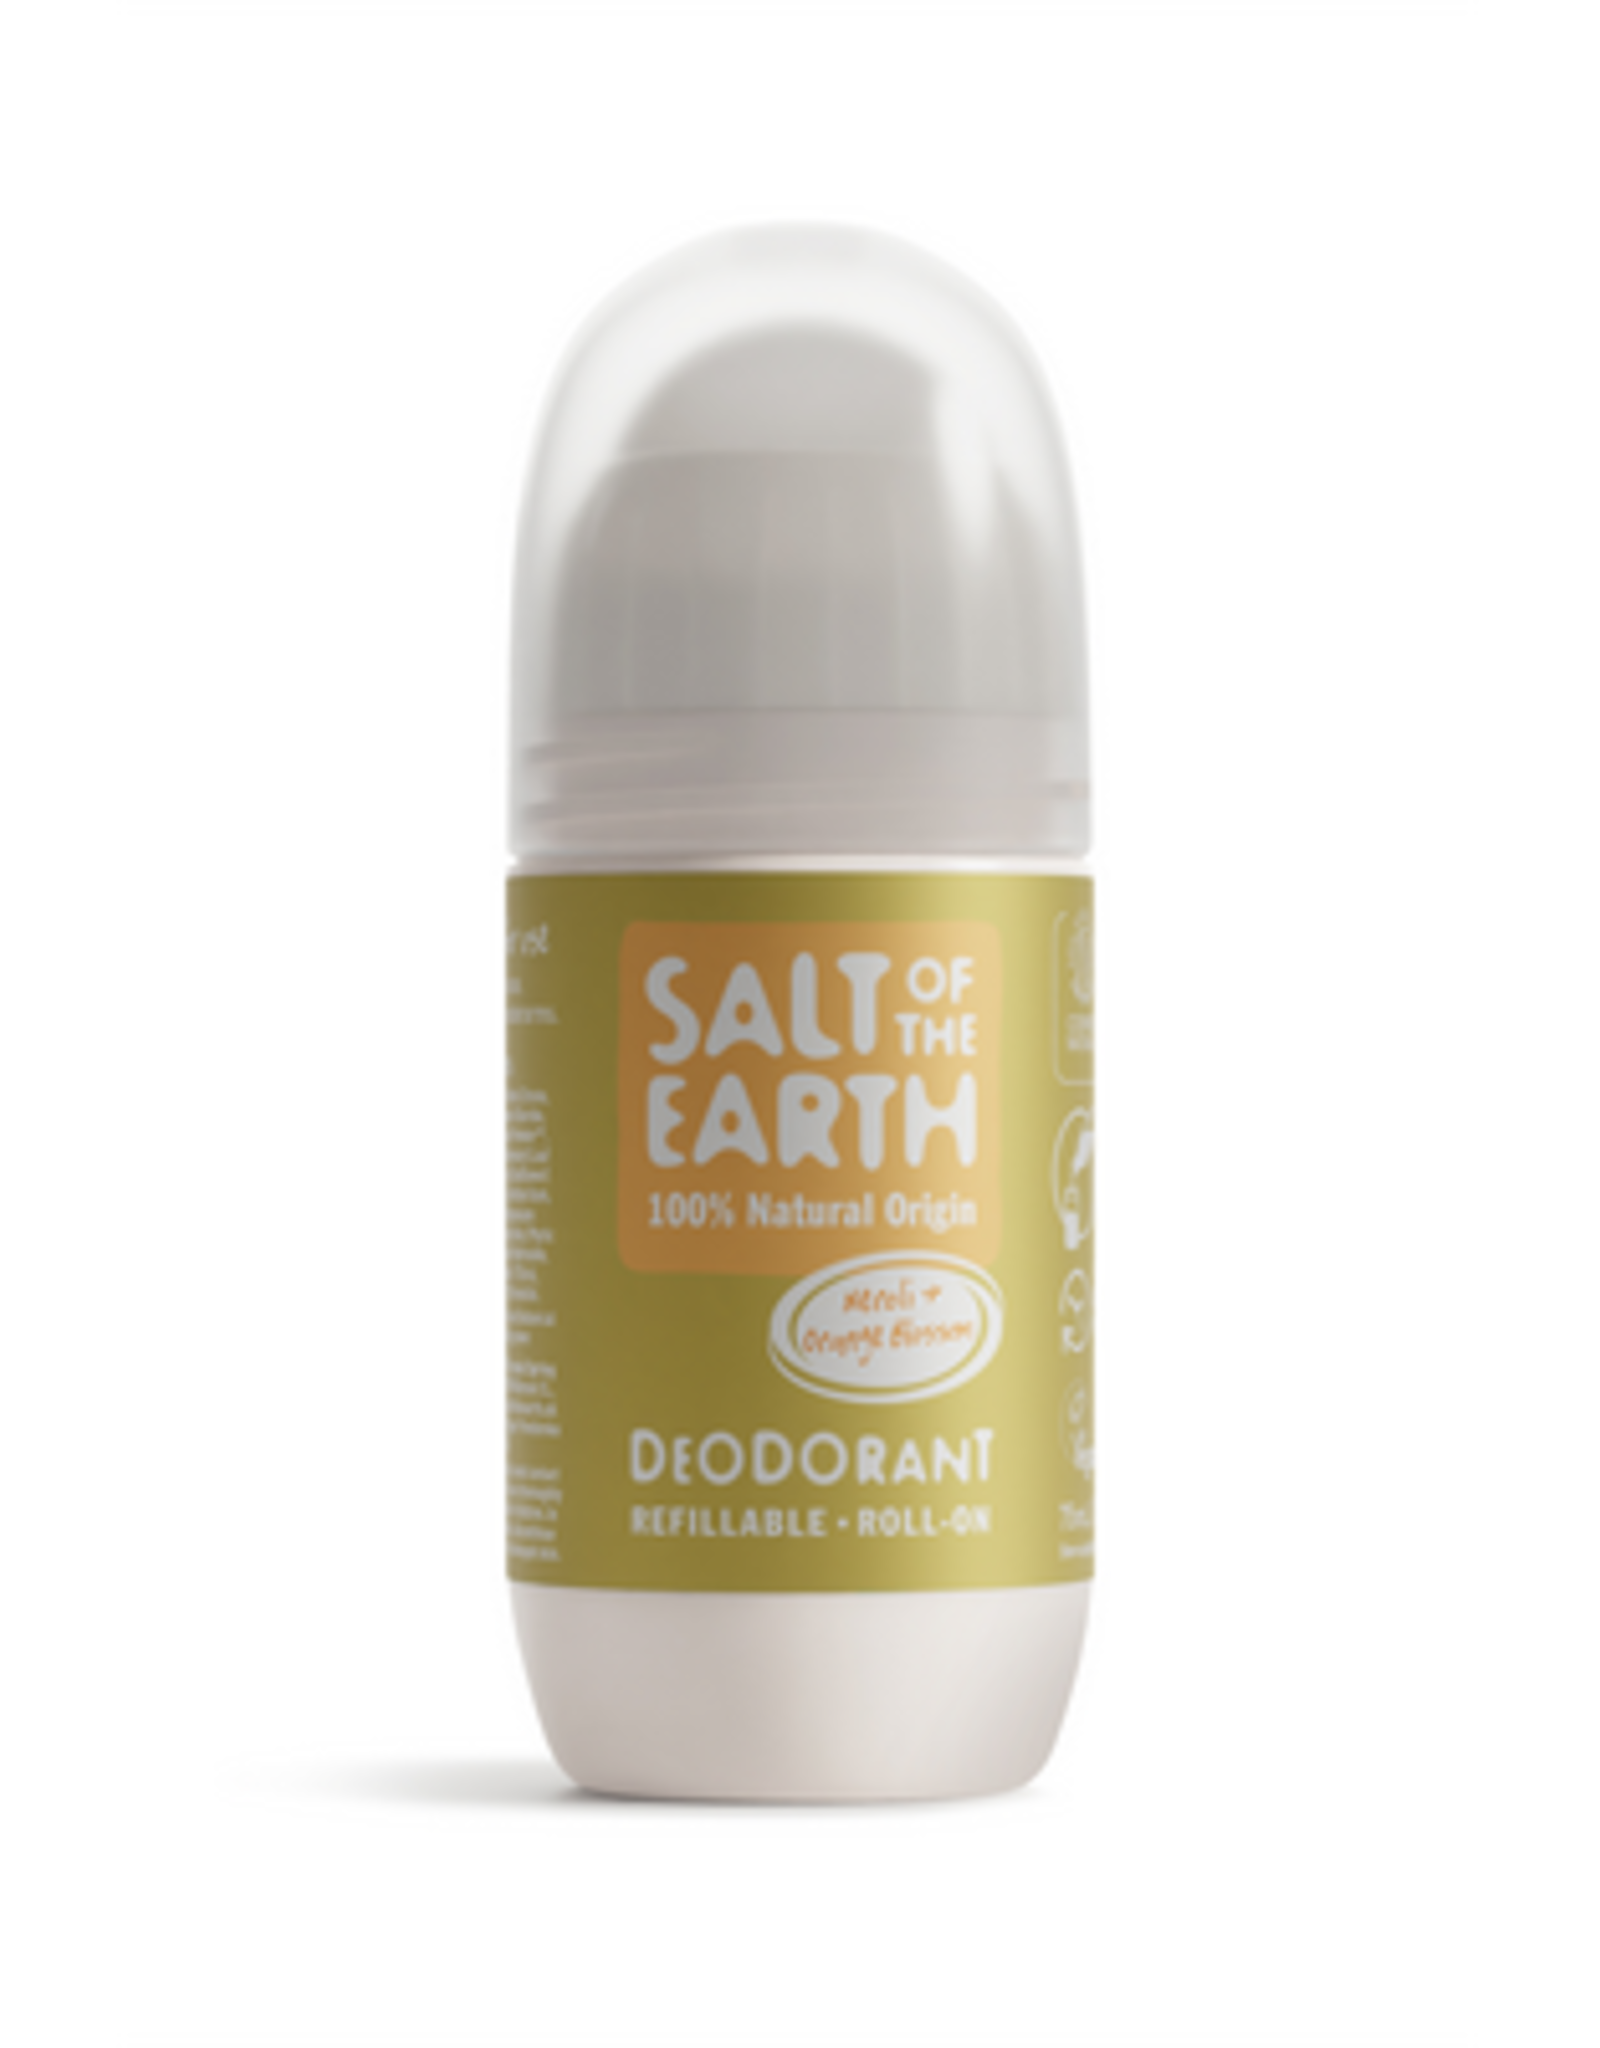 Salt of the Earth Neroli and Orange blossom Refillable Roll-On Deodorant COSMOS Natural 75ml